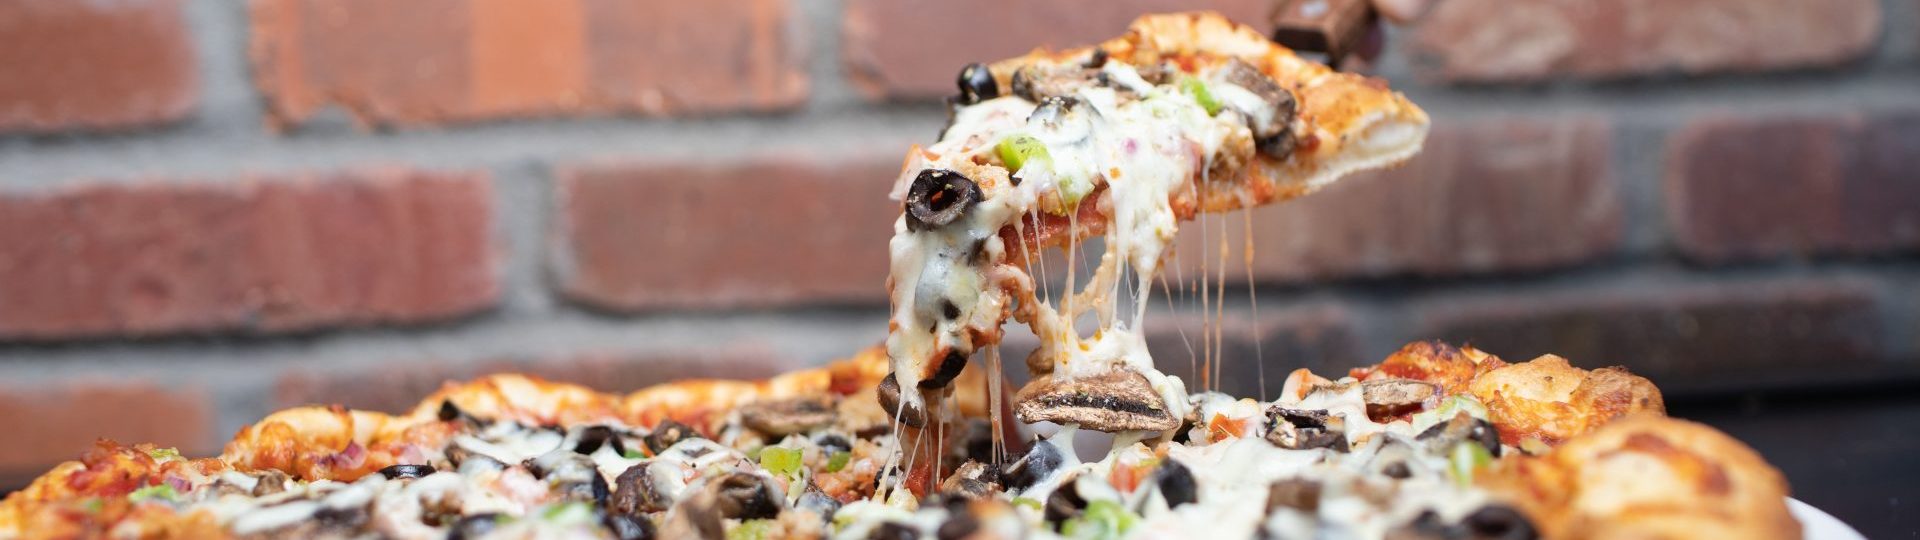 Pizza with lots of toppings and thick crust, and a hand pulling a piece out with a serving utensil.